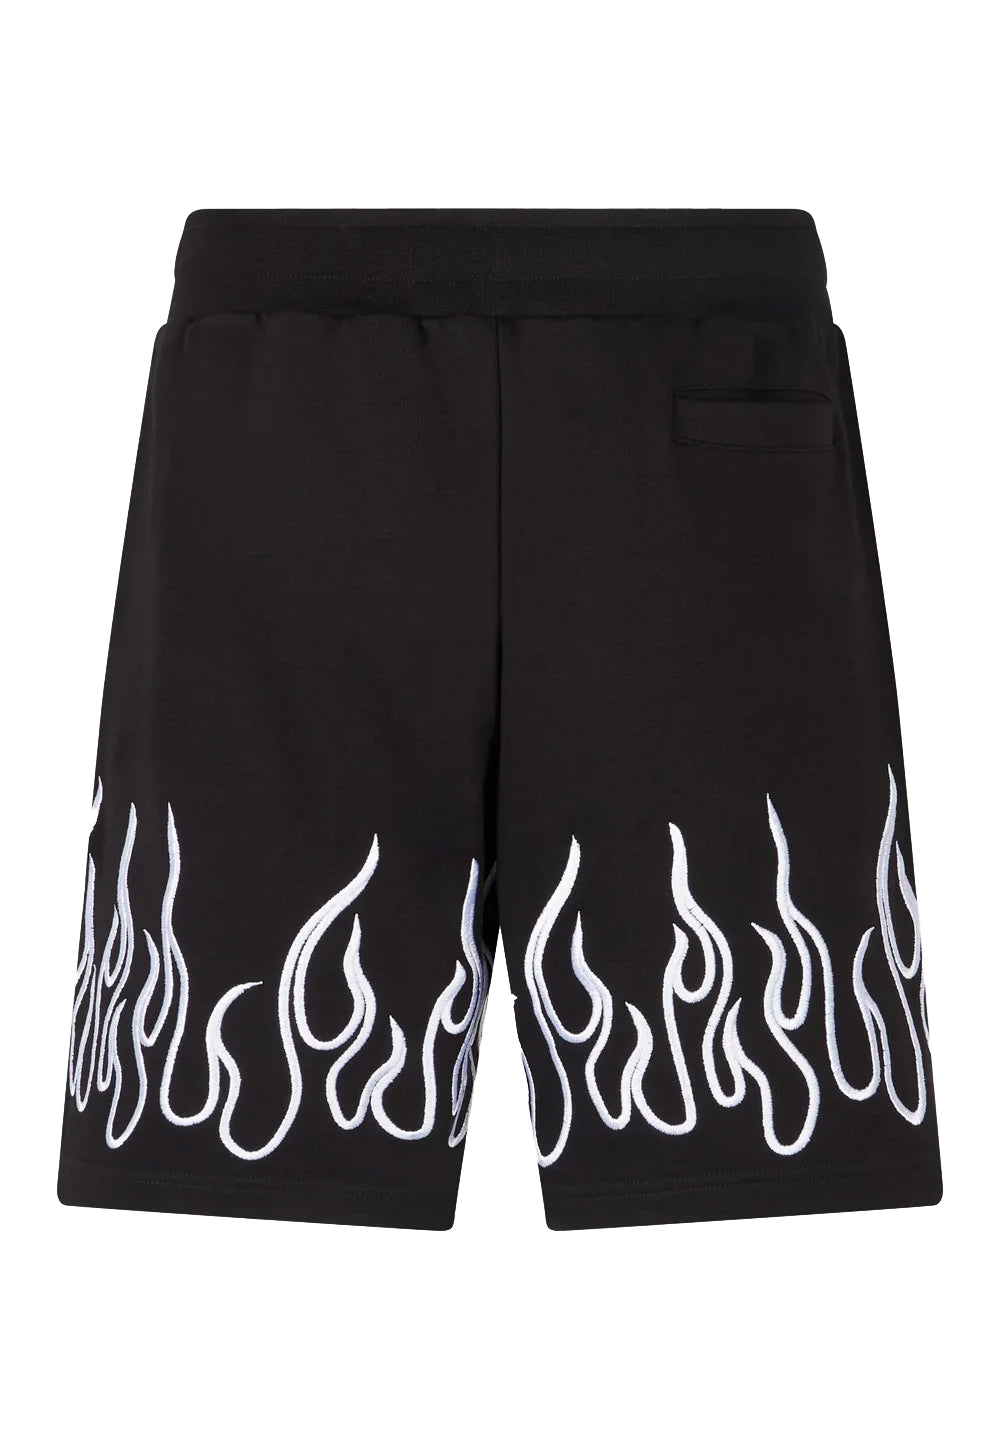 Shorts with White Embroidered Flames